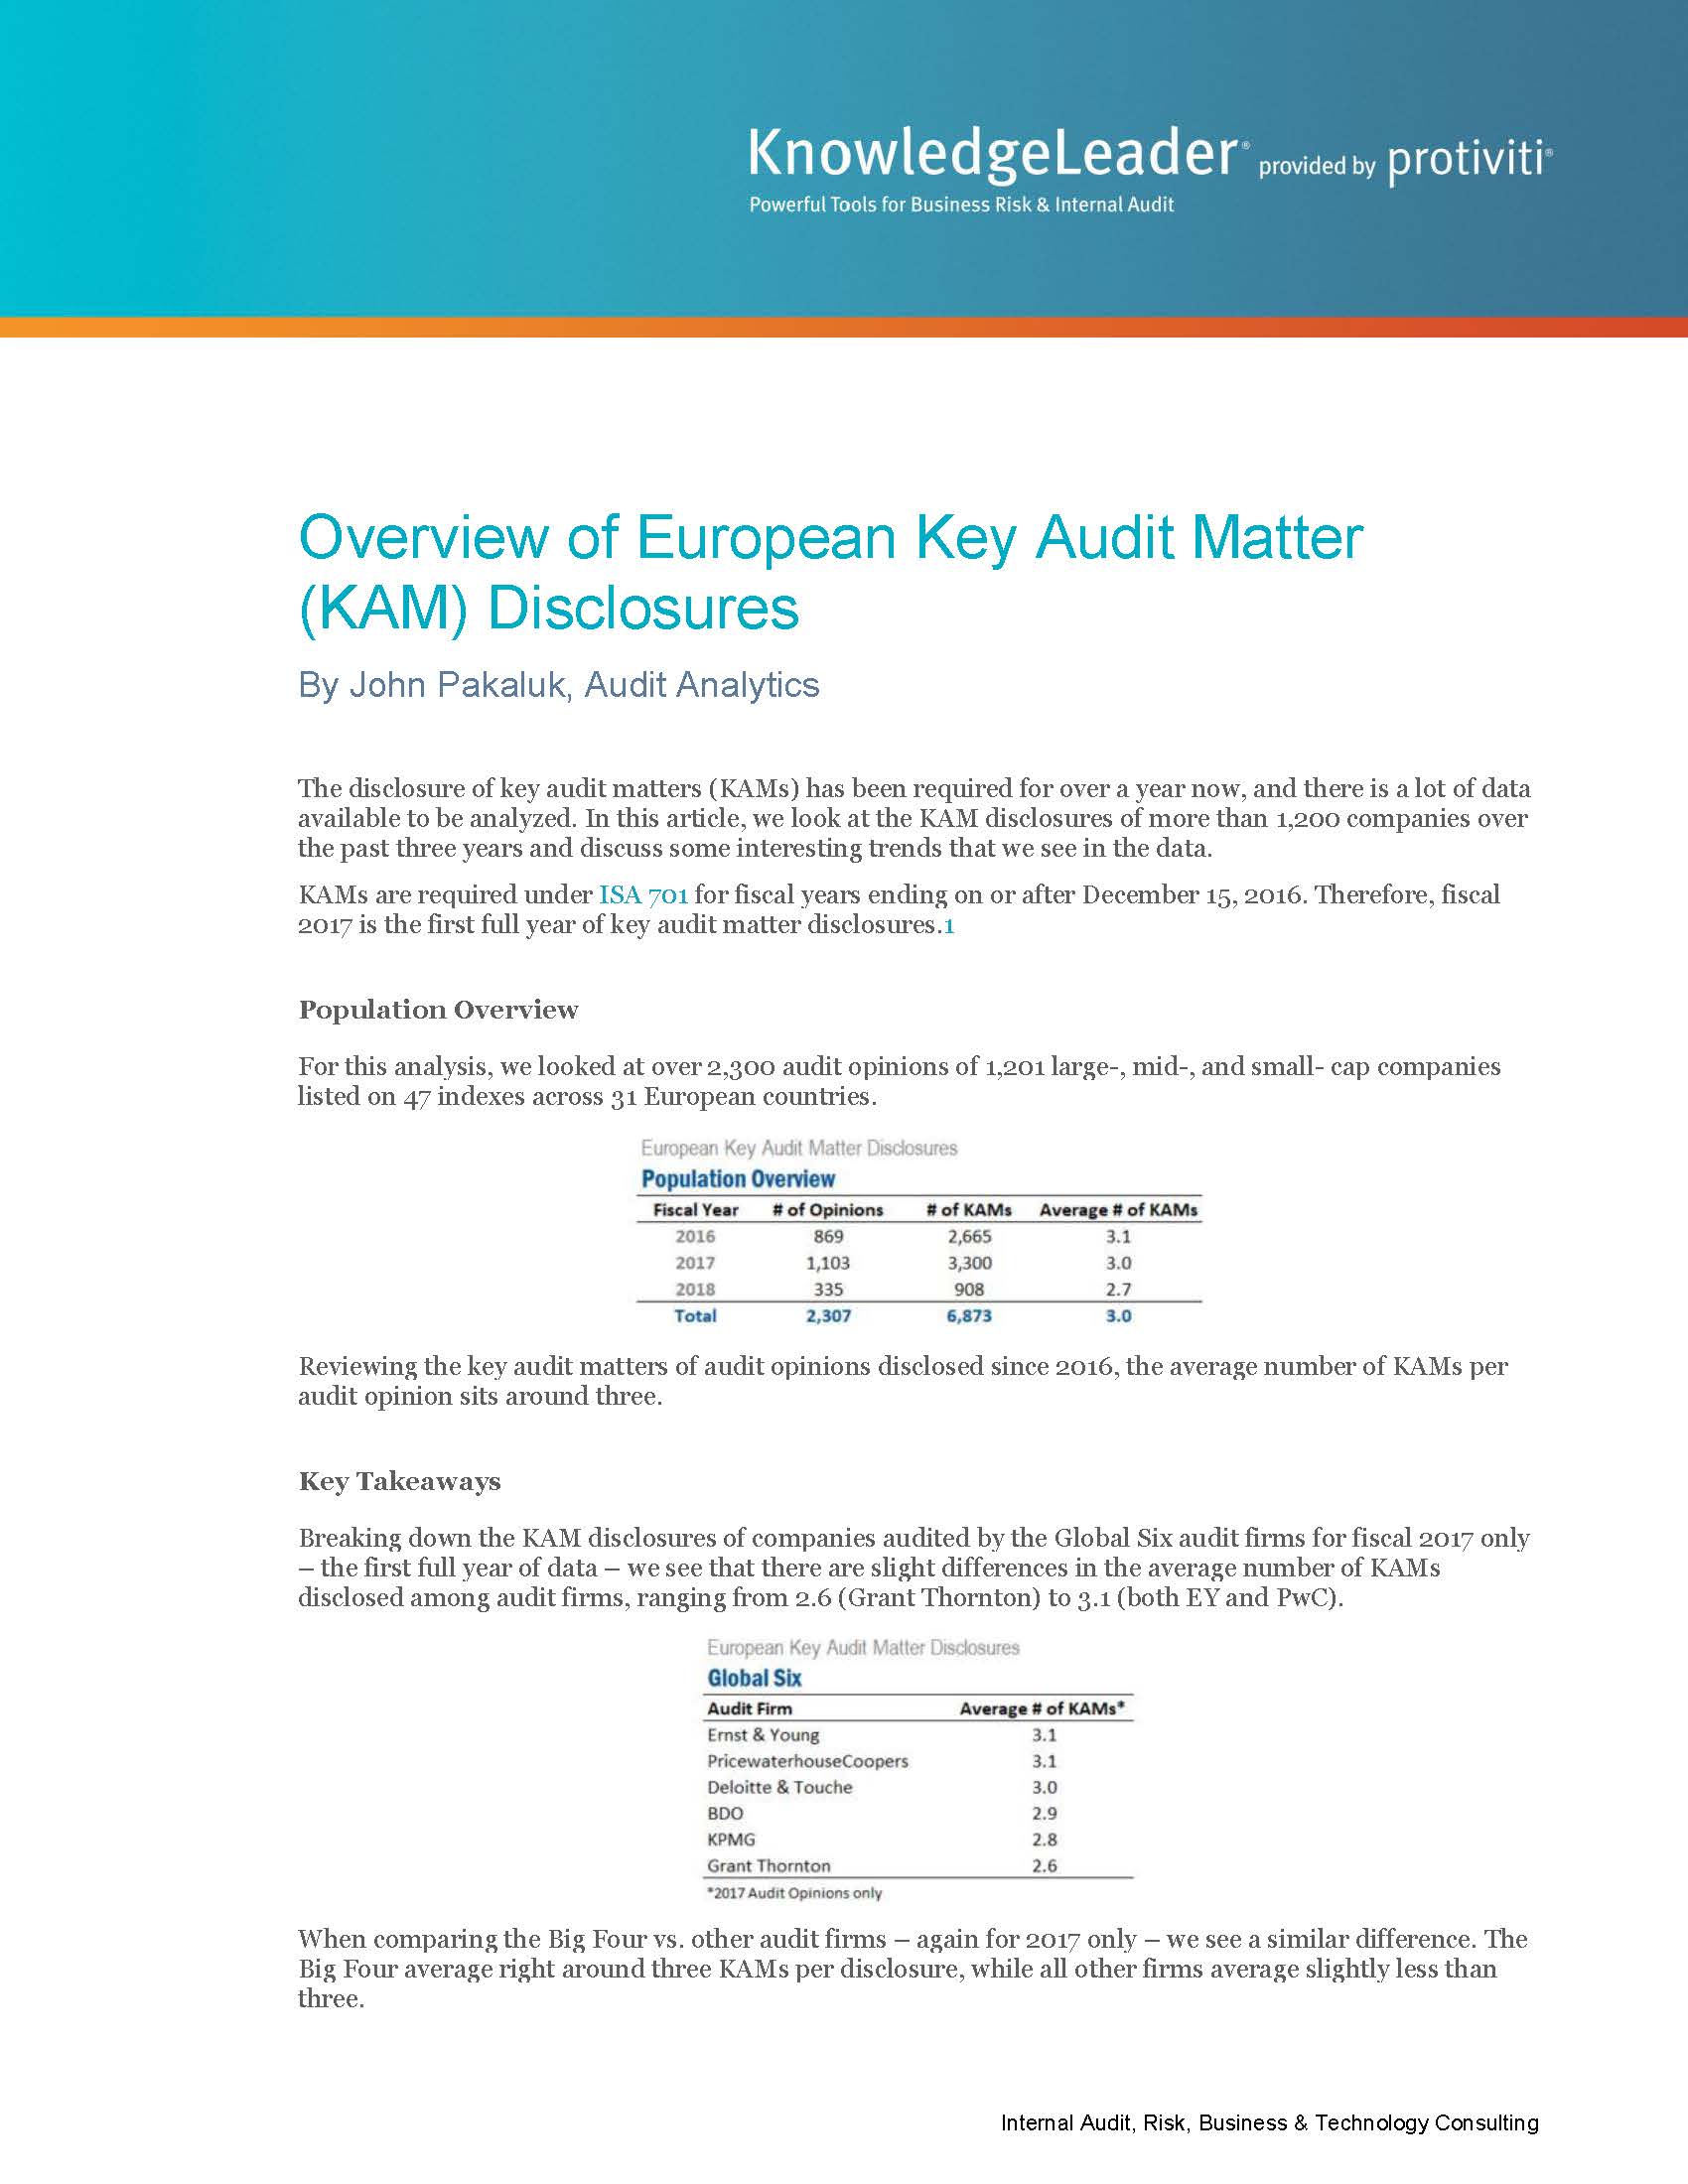 Screenshot of the first page of Overview of European Key Audit Matter (KAM) Disclosures